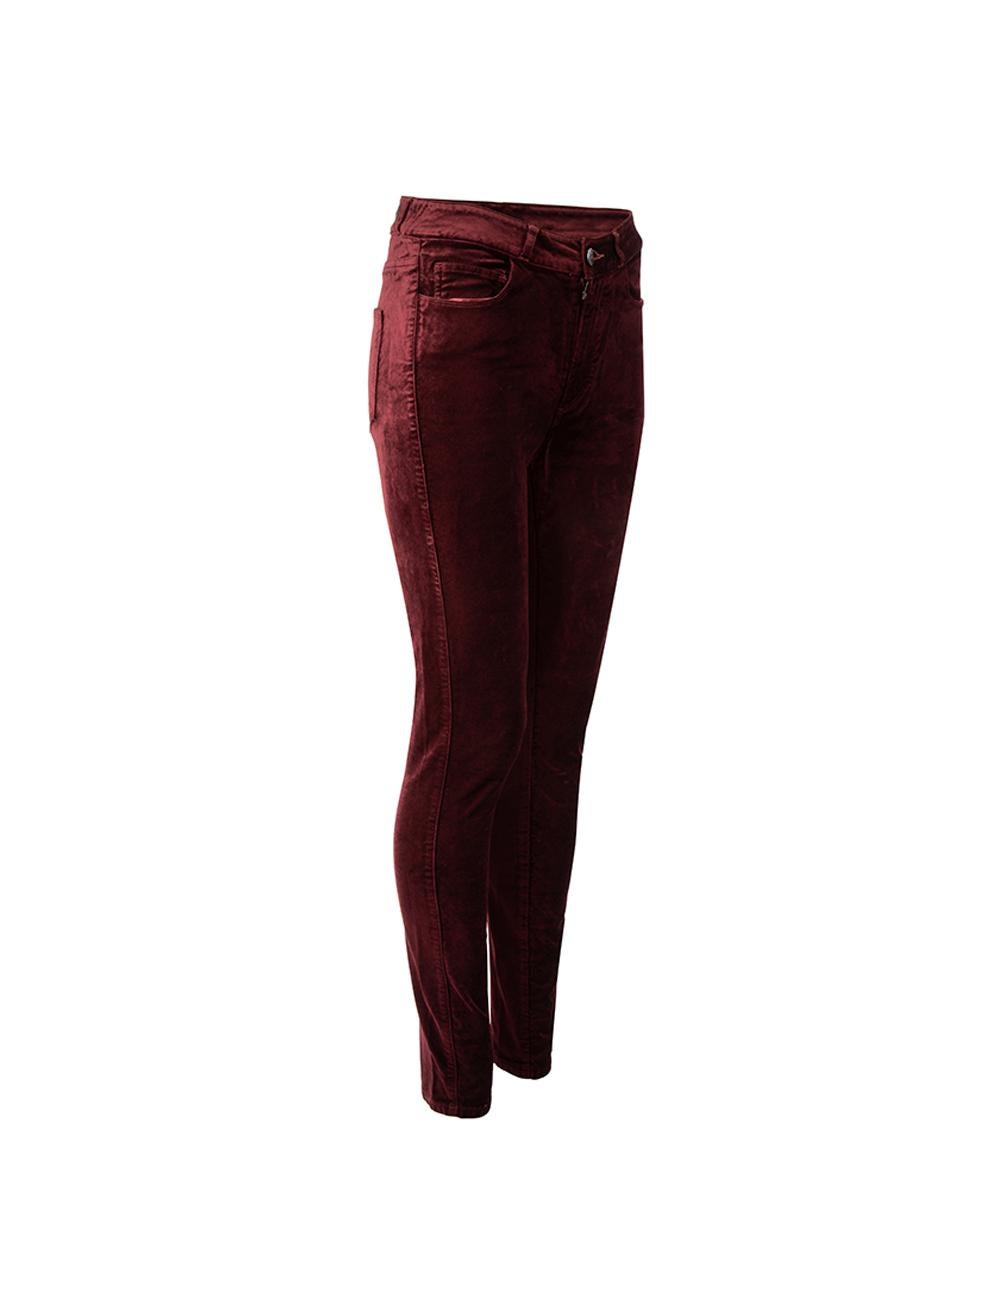 CONDITION is Very good. Minimal wear to jeans is evident. Minimal wear to the velvet exterior and fraying at belt loop on this used Paige designer resale item. 



Details


Burgundy

Velvet

Skinny trousers

High rise

Front zip closure with